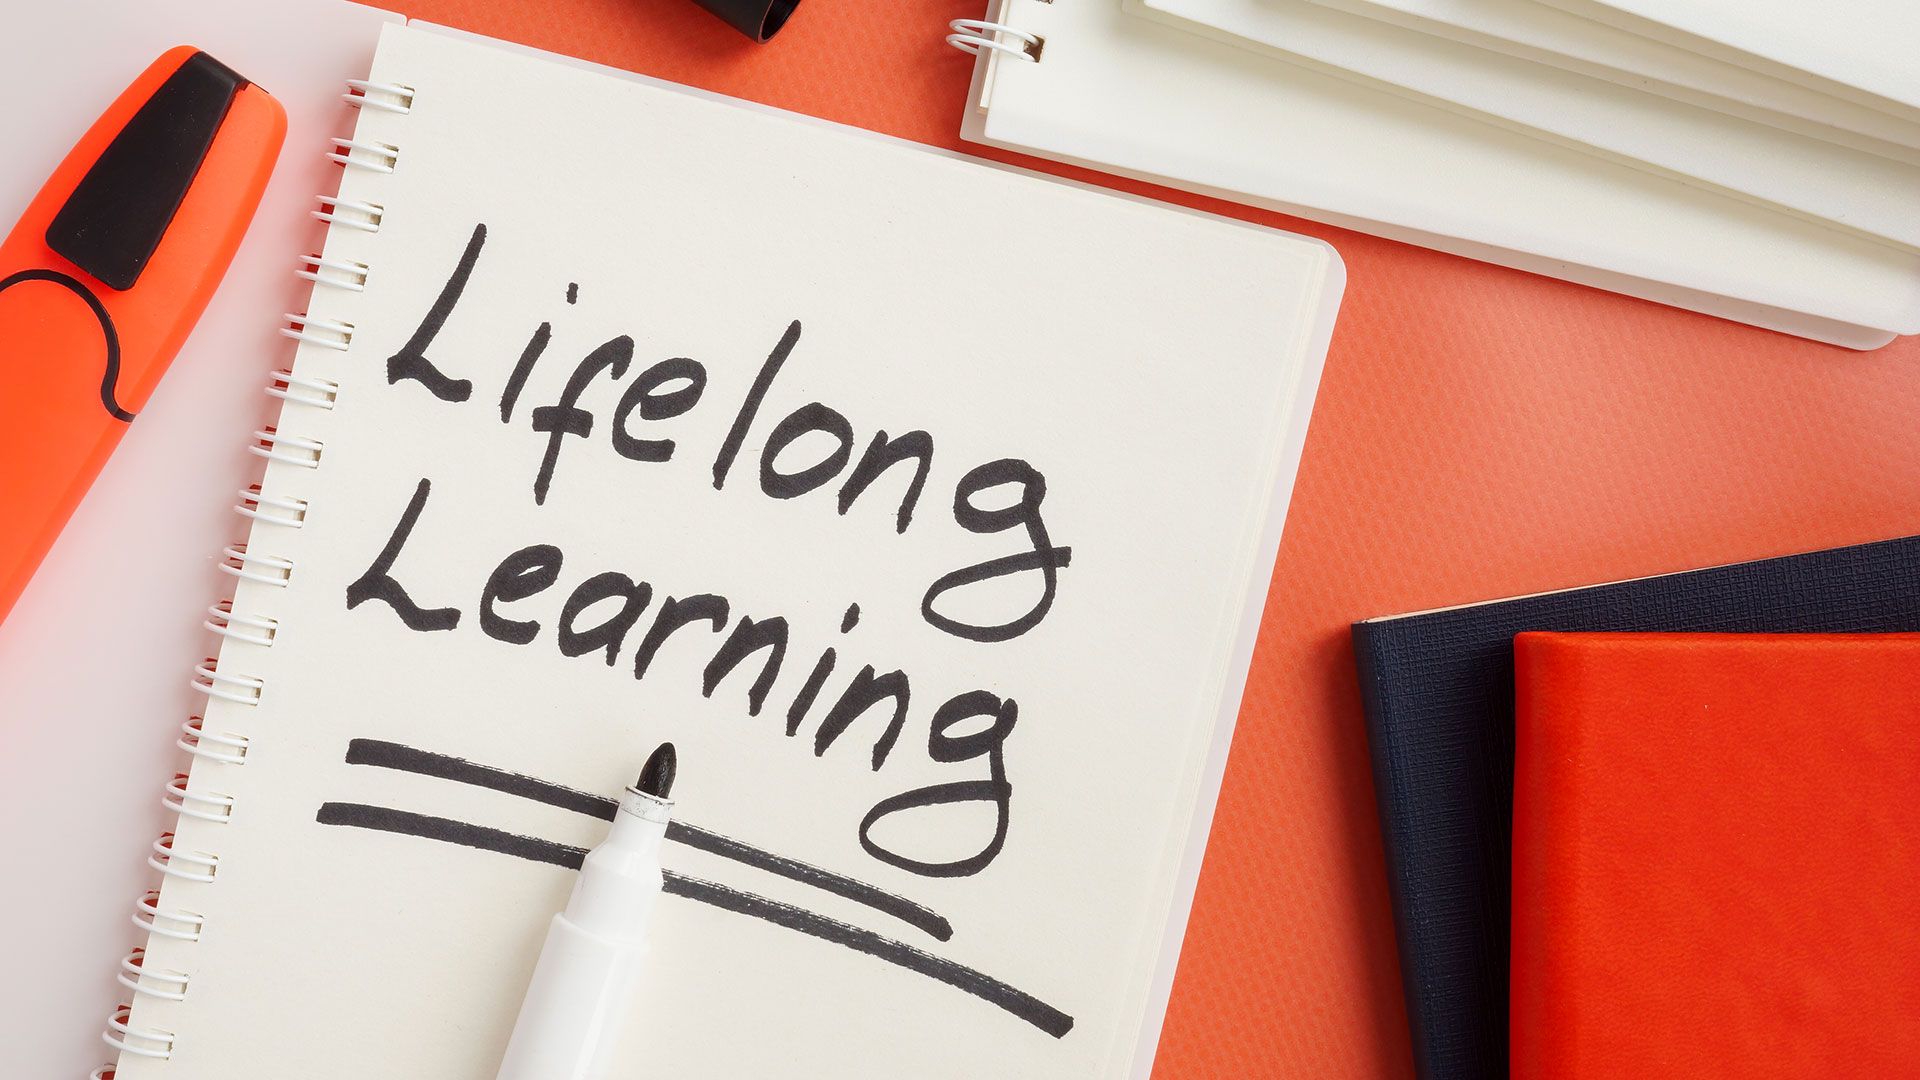 Notepad with the words "Lifelong Learning" hand-written on it.